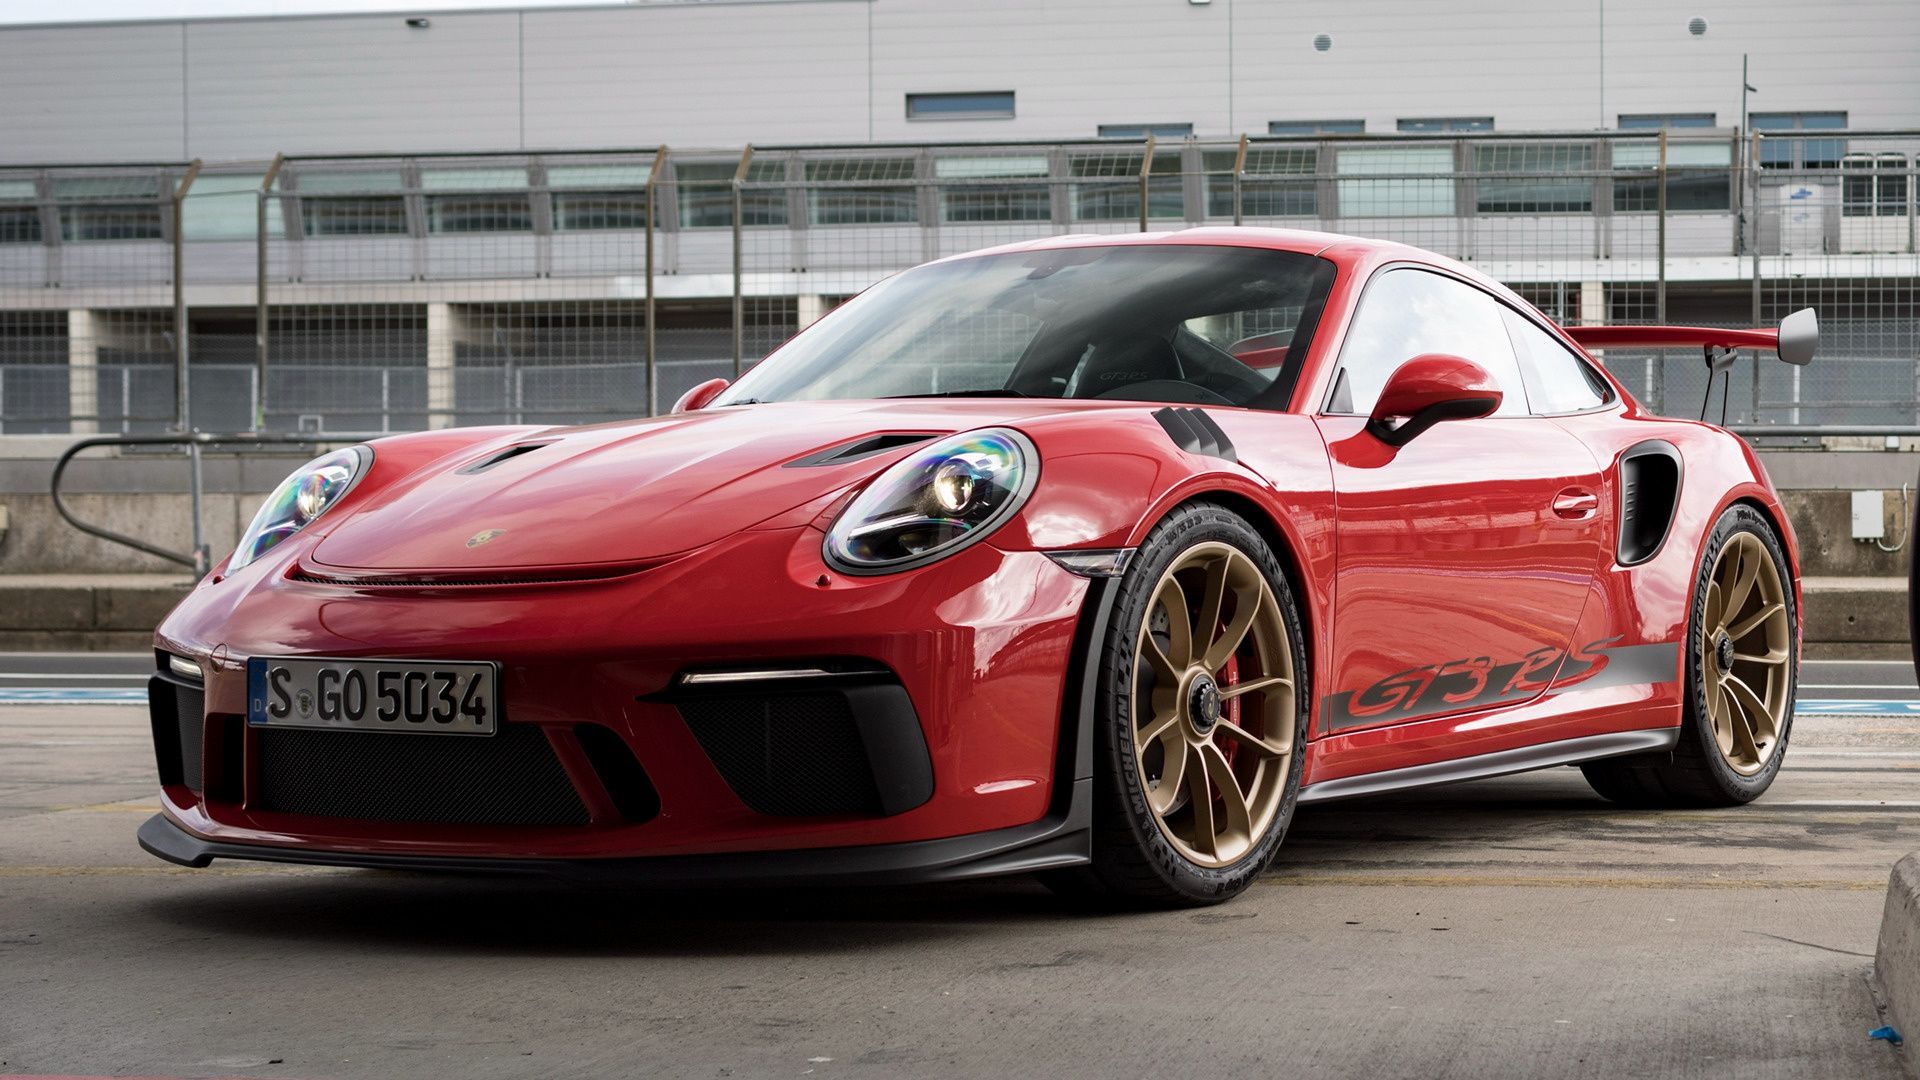 Porsche 911 GT3 RS and HD Image